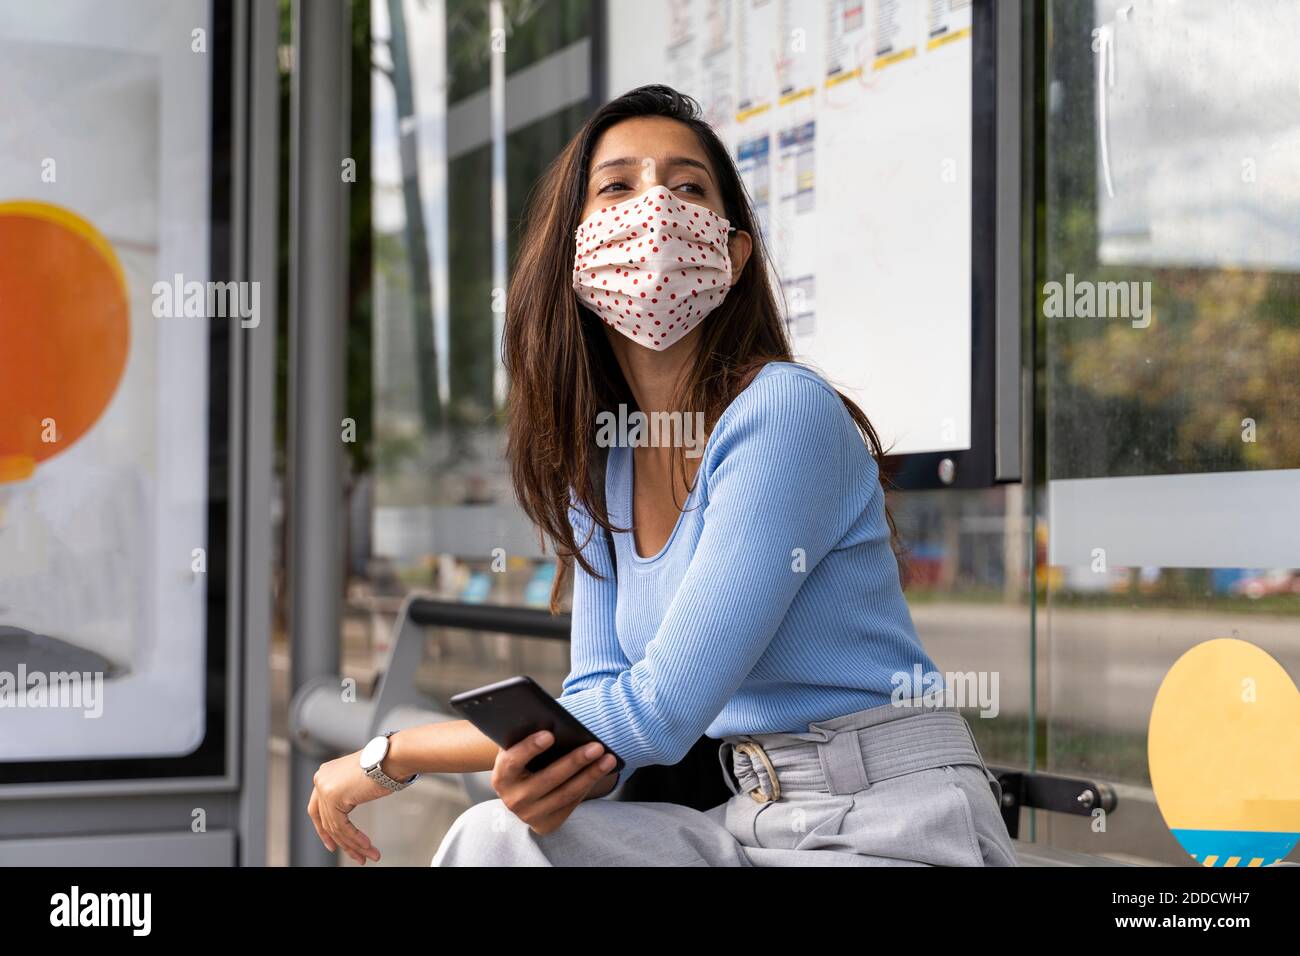 Woman with smart phone wearing face mask while waiting at bus stand during COVID-19 Stock Photo